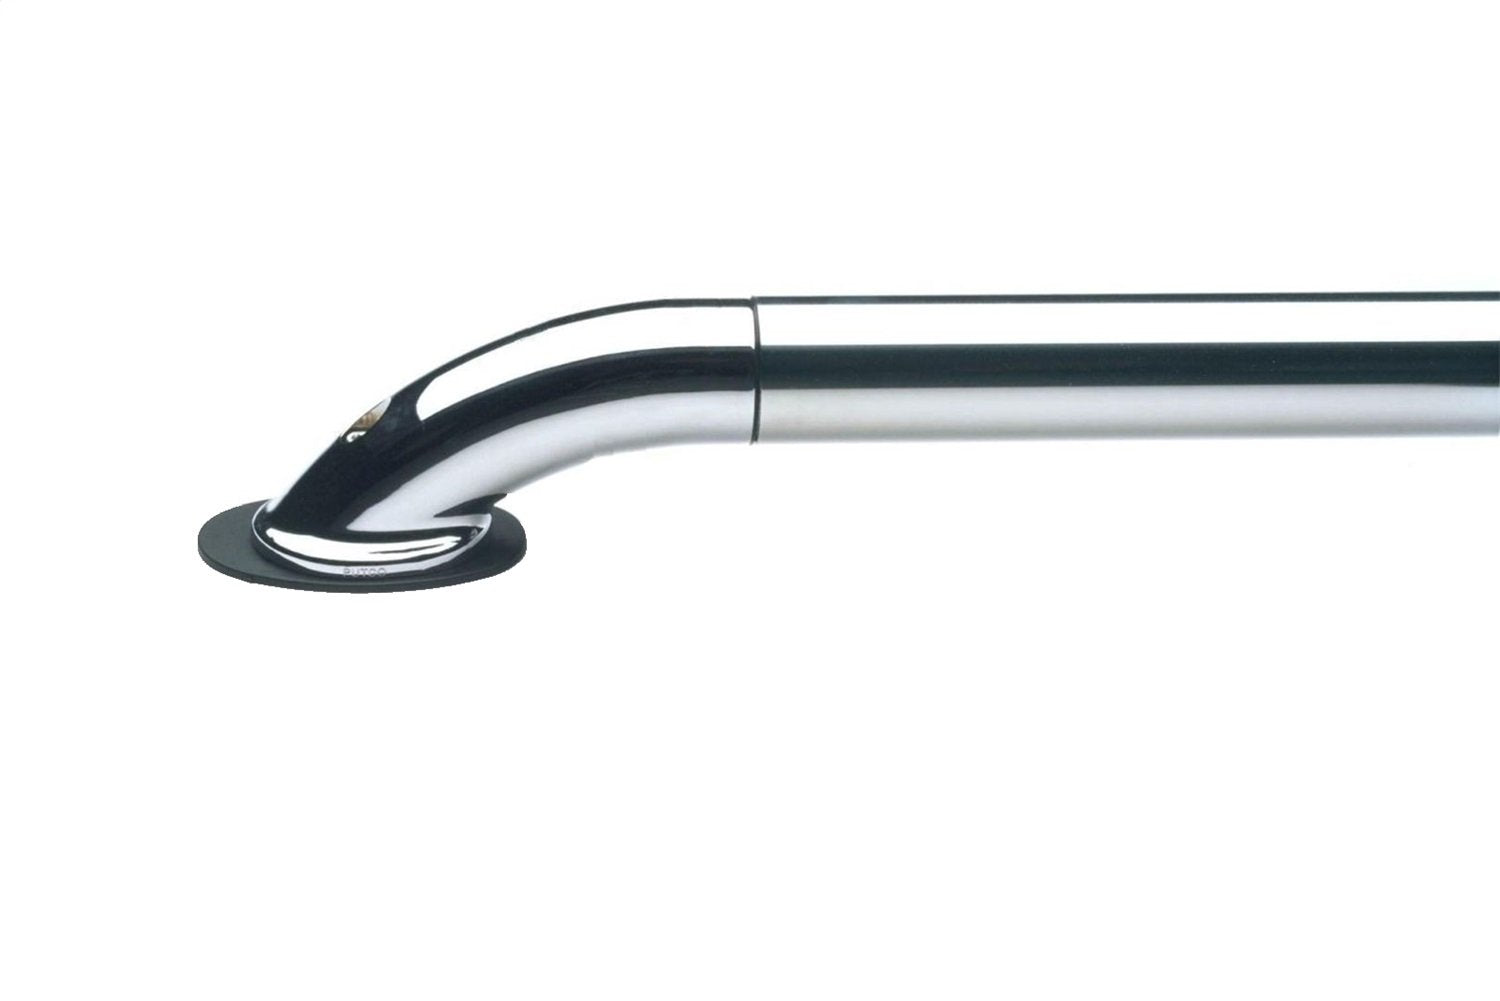 Putco 59895 Bed Rails, Approx. 5 ft. 5 in. Polished